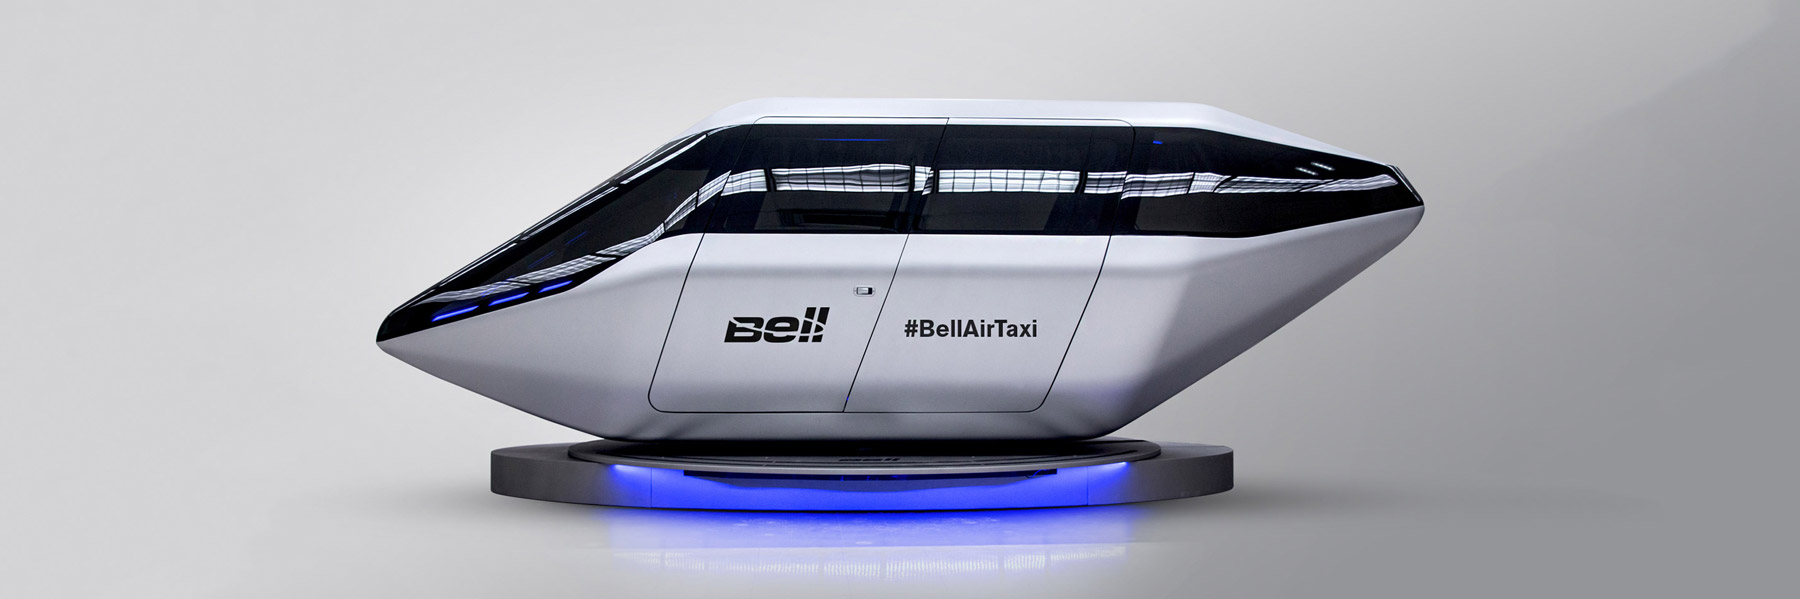 future of uber flying taxi is revealed in bell helicopter ...